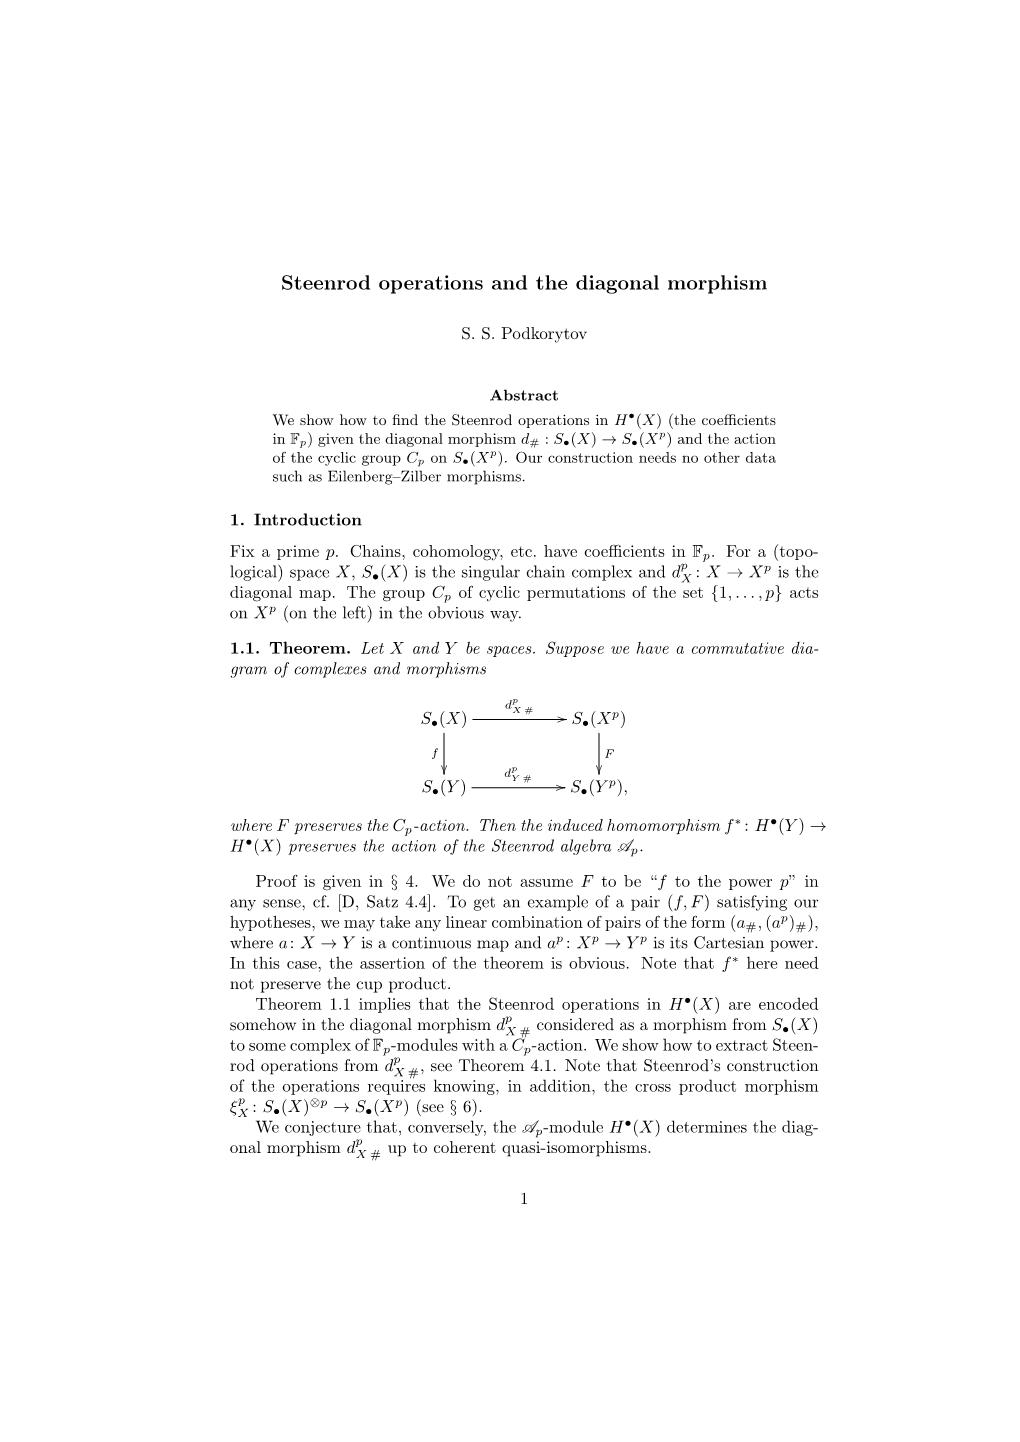 Steenrod Operations and the Diagonal Morphism